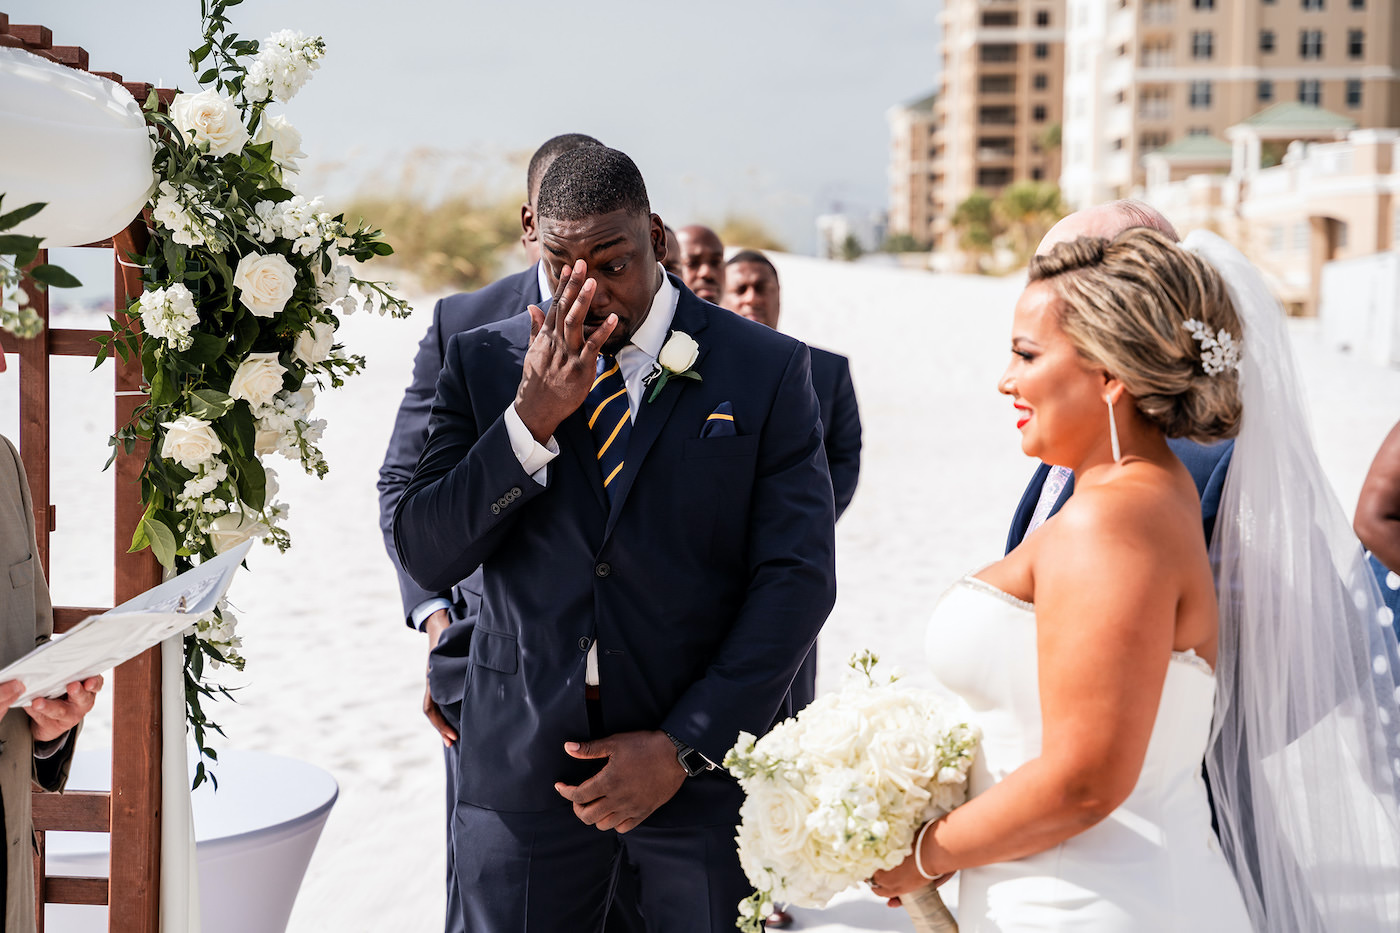 Florida Bride and Groom During Outdoor Beachfront Wedding Ceremony, Tearful Groom, Romantic Tropical Decor with White Roses and Greenery | Tampa Bay Hotel and Wedding Venue Hilton Clearwater Beach